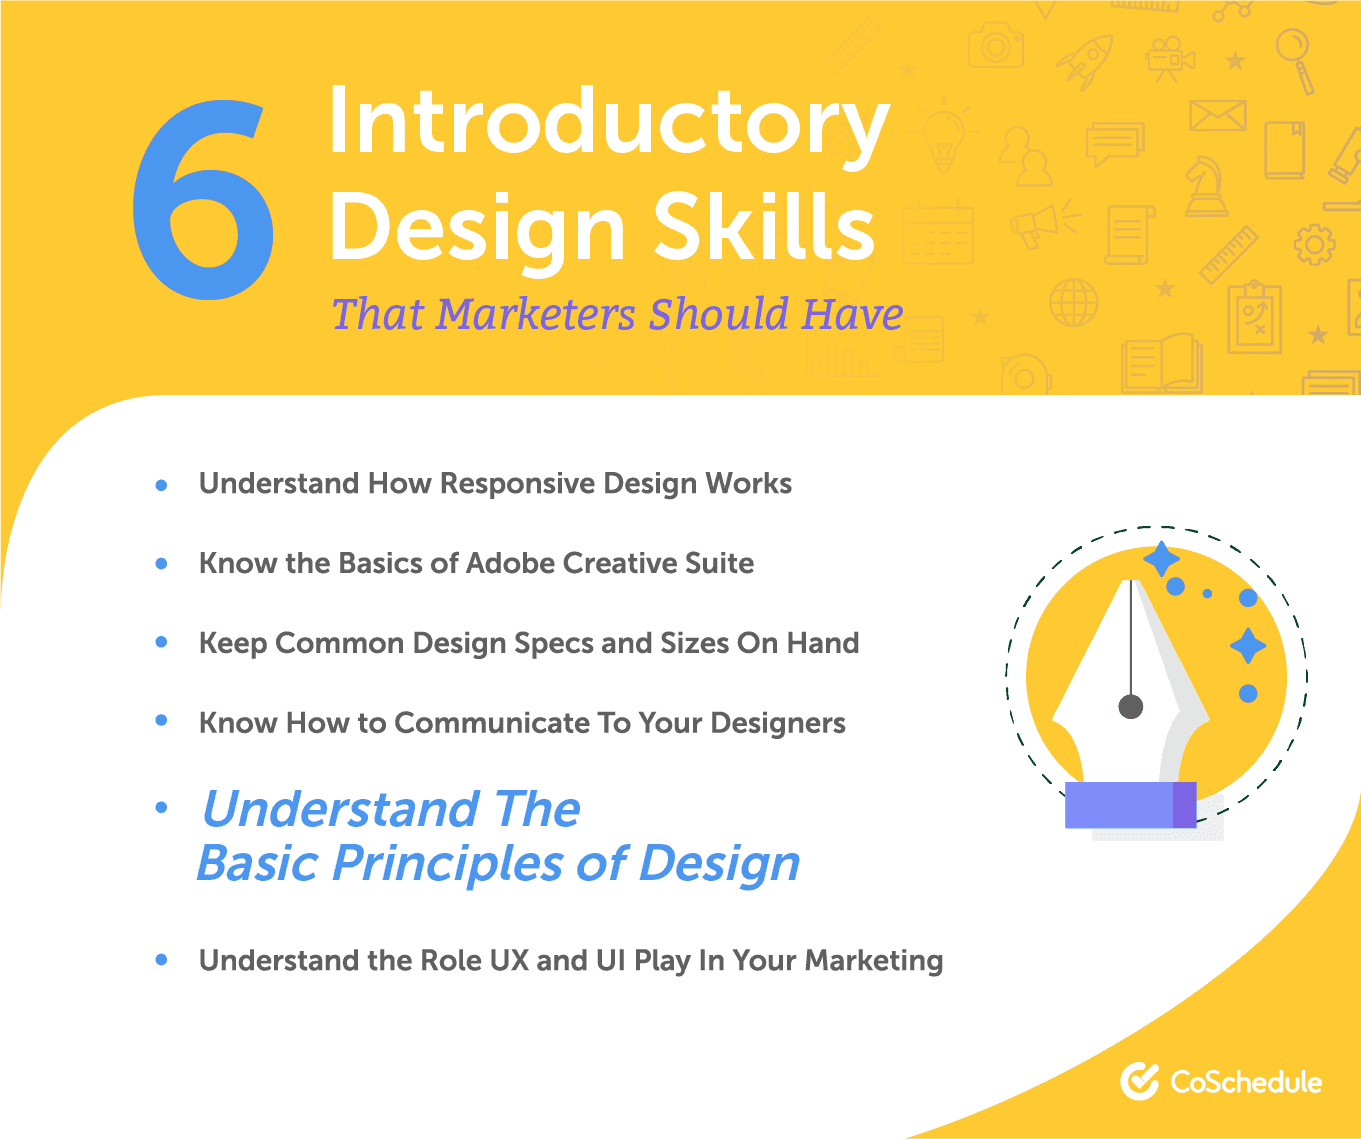 6 introductory design skills marketers should have.